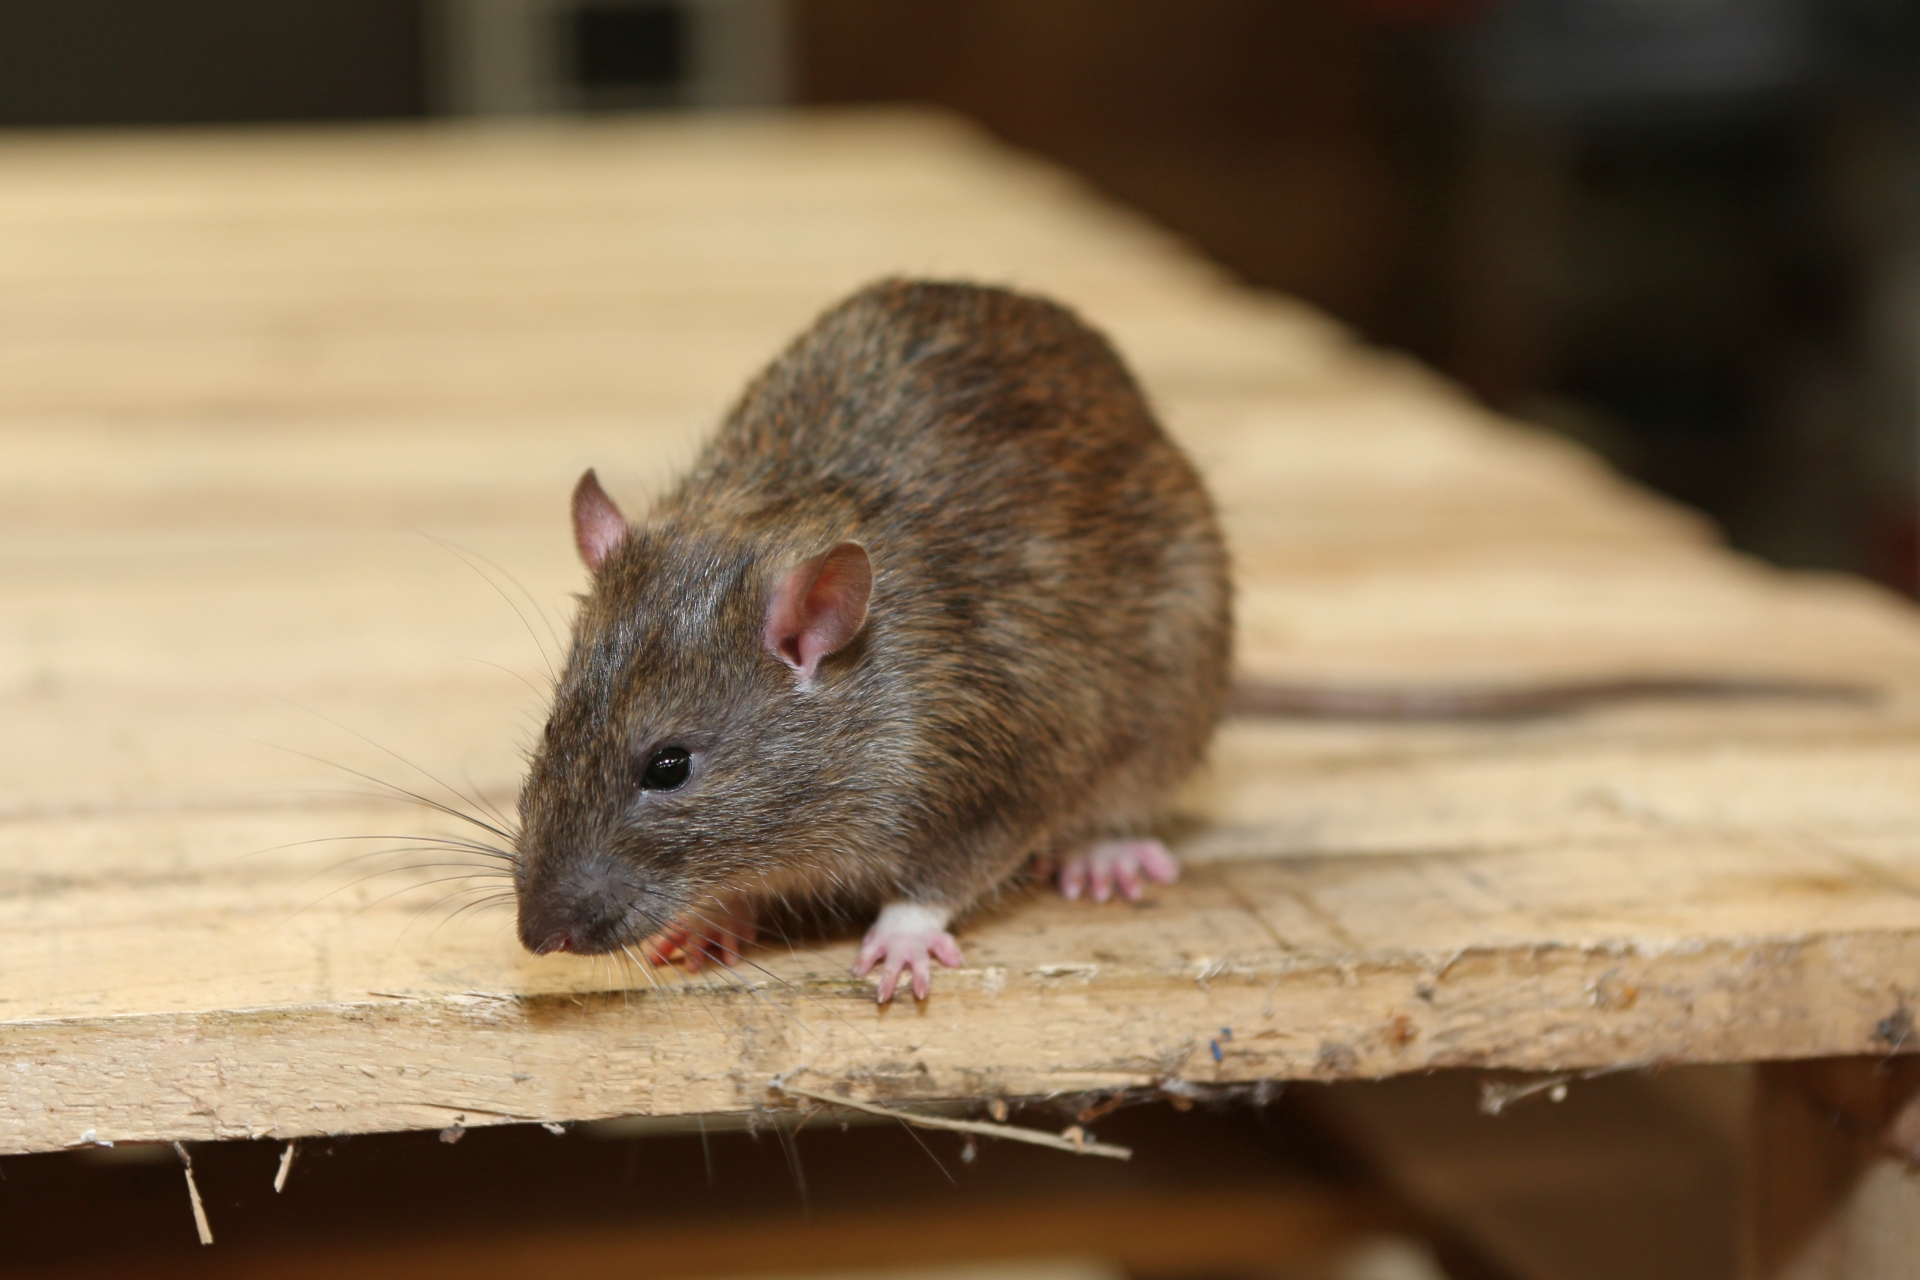 Rat extermination, Pest Control in Thamesmead, SE28. Call Now 020 8166 9746